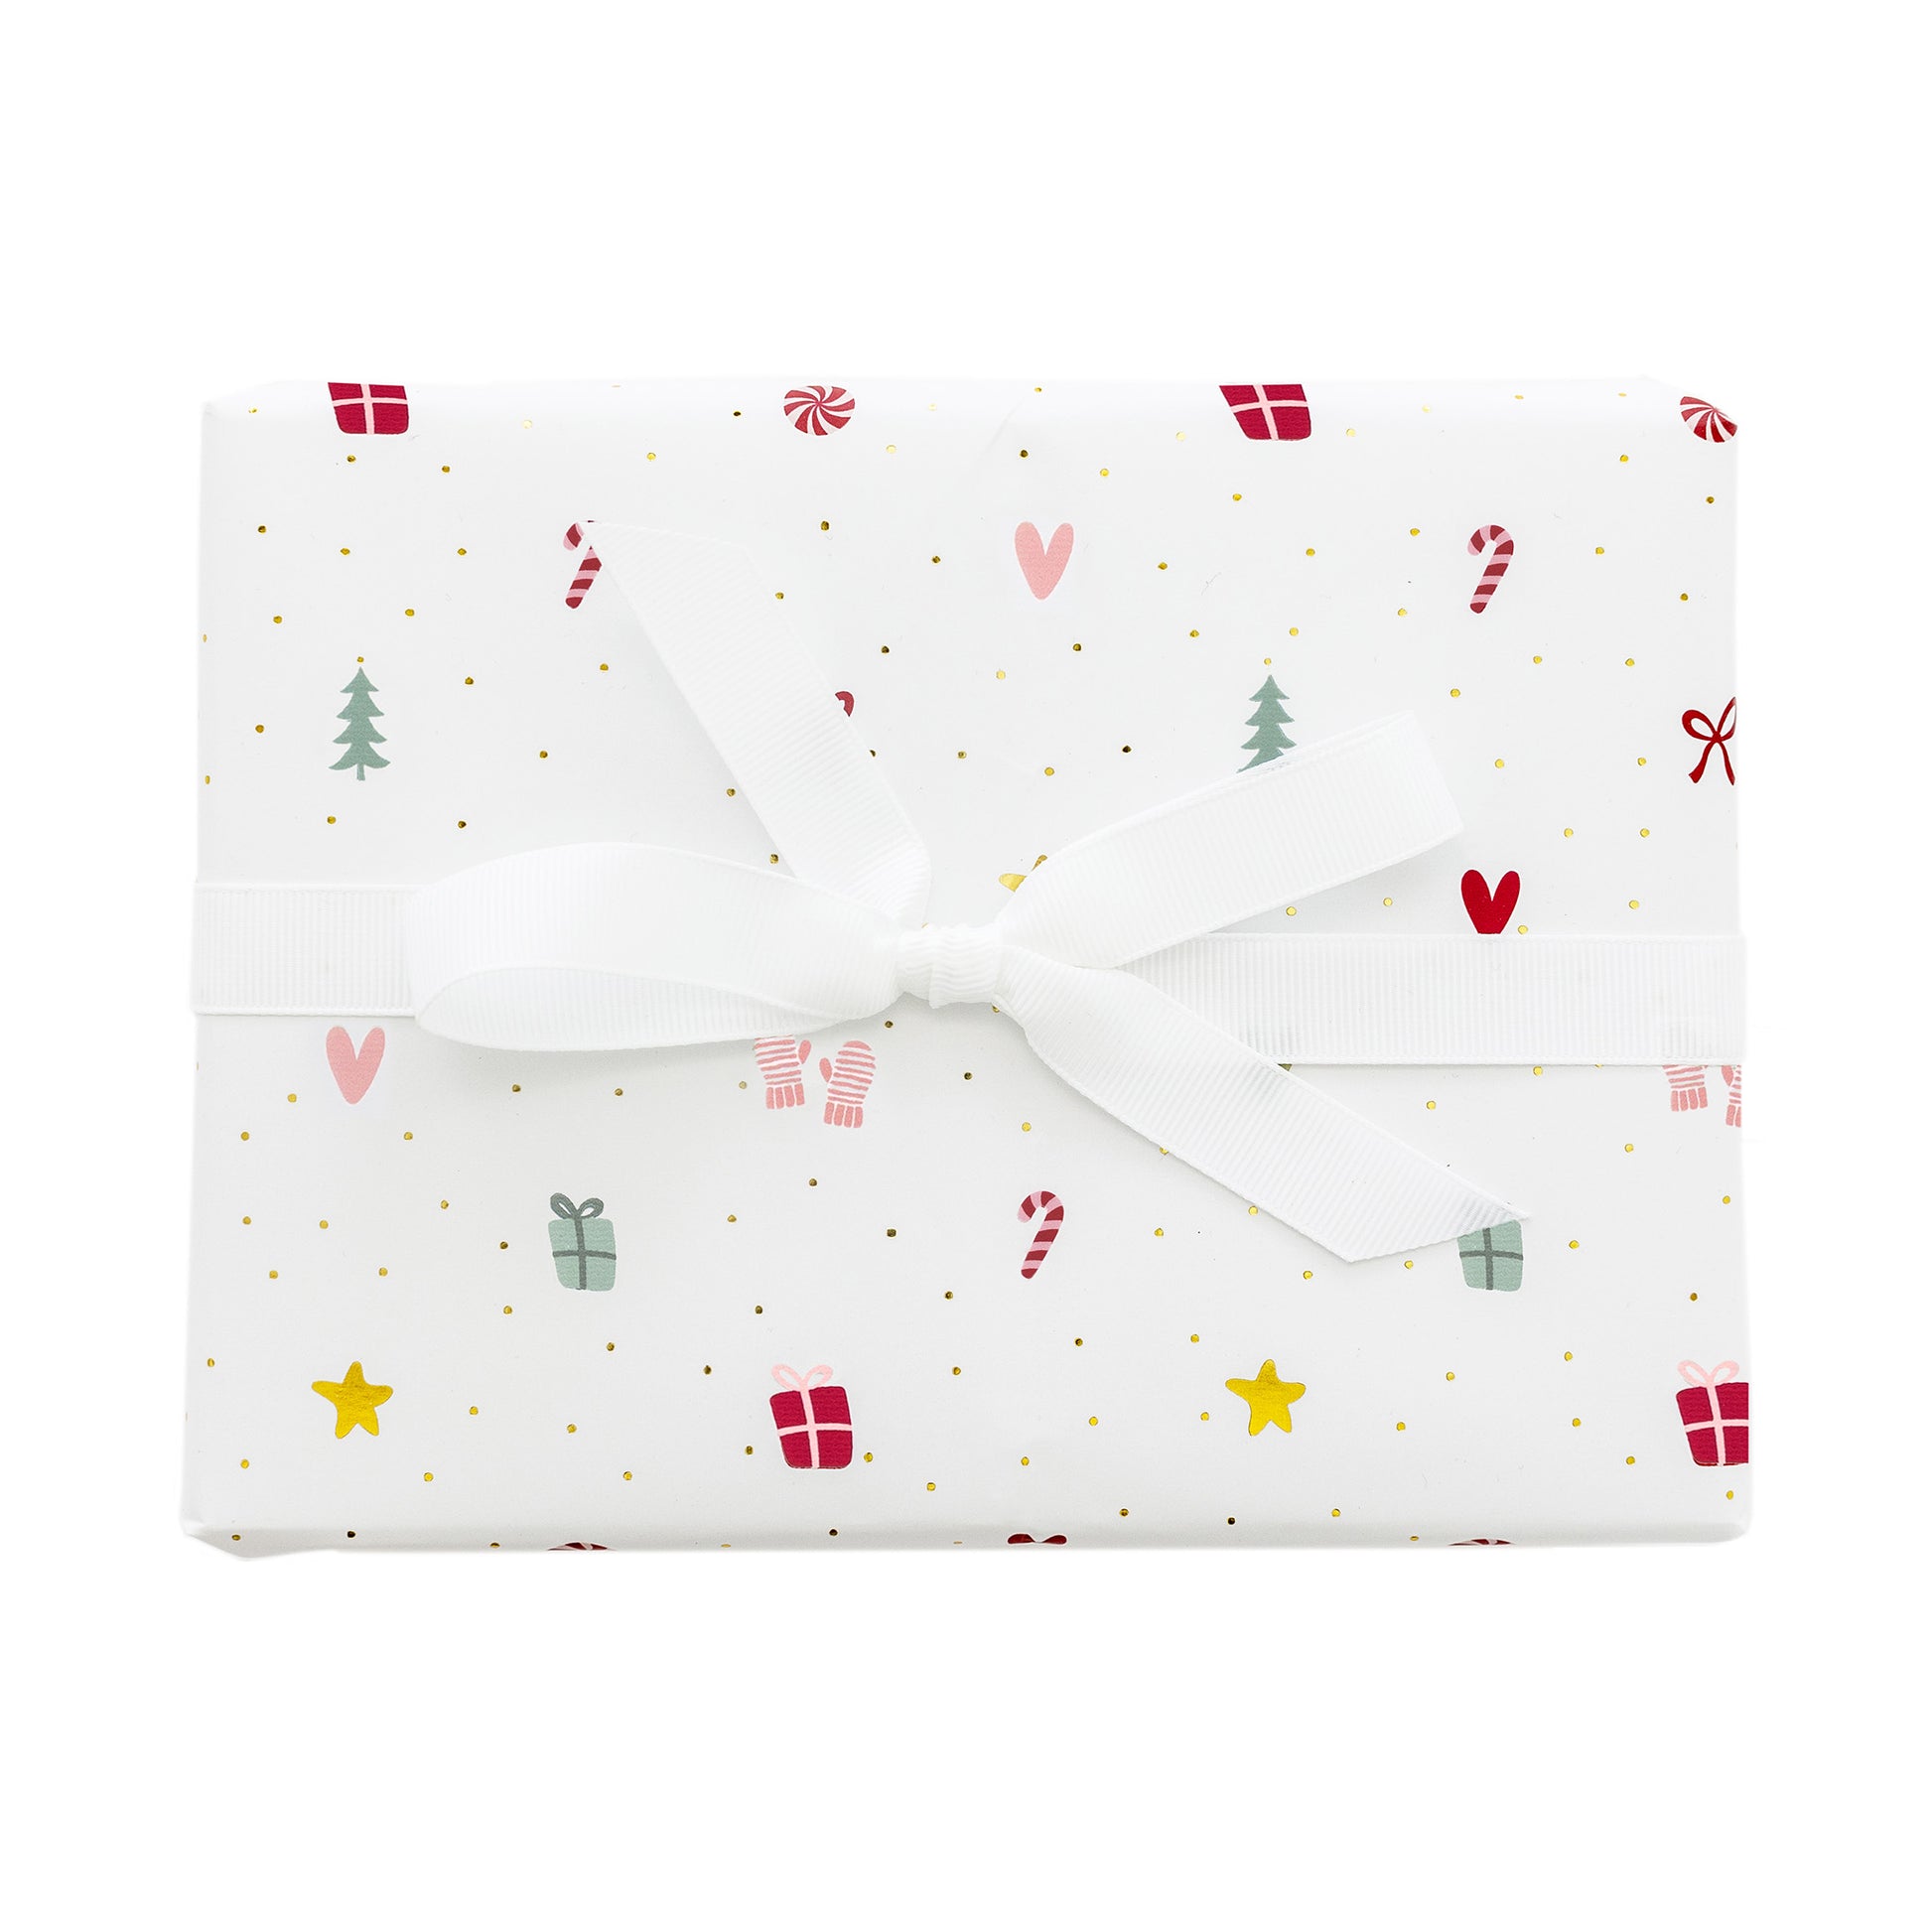 Santa's Workshop Christmas Tissue Paper Collection, Exclusive Scalloped  Edge, 72 Sheets Each 19 x 25, Patterns and Solids